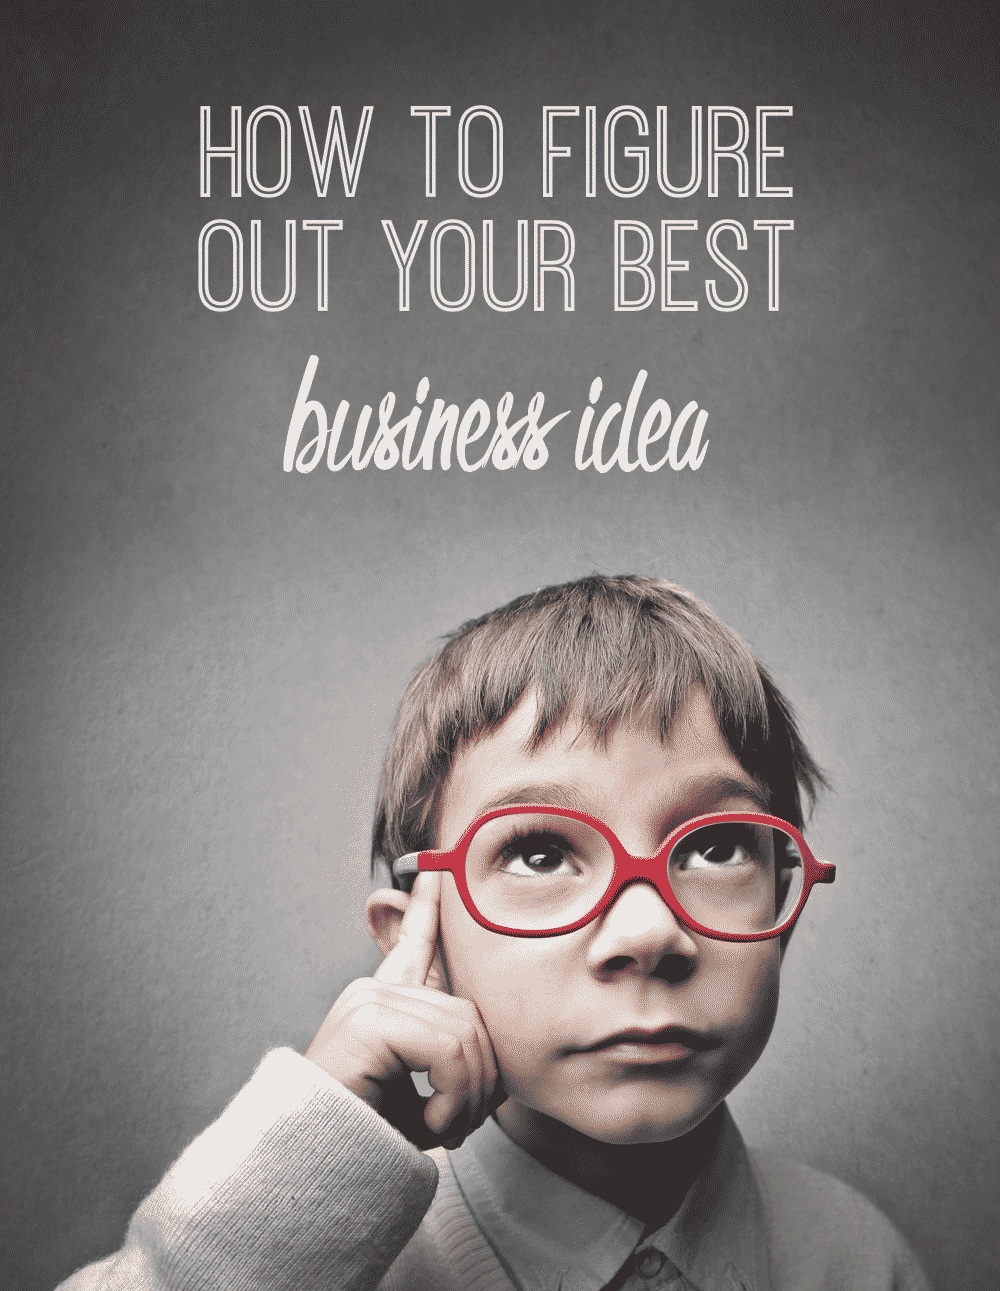 How To Figure Out Your Best Business Idea